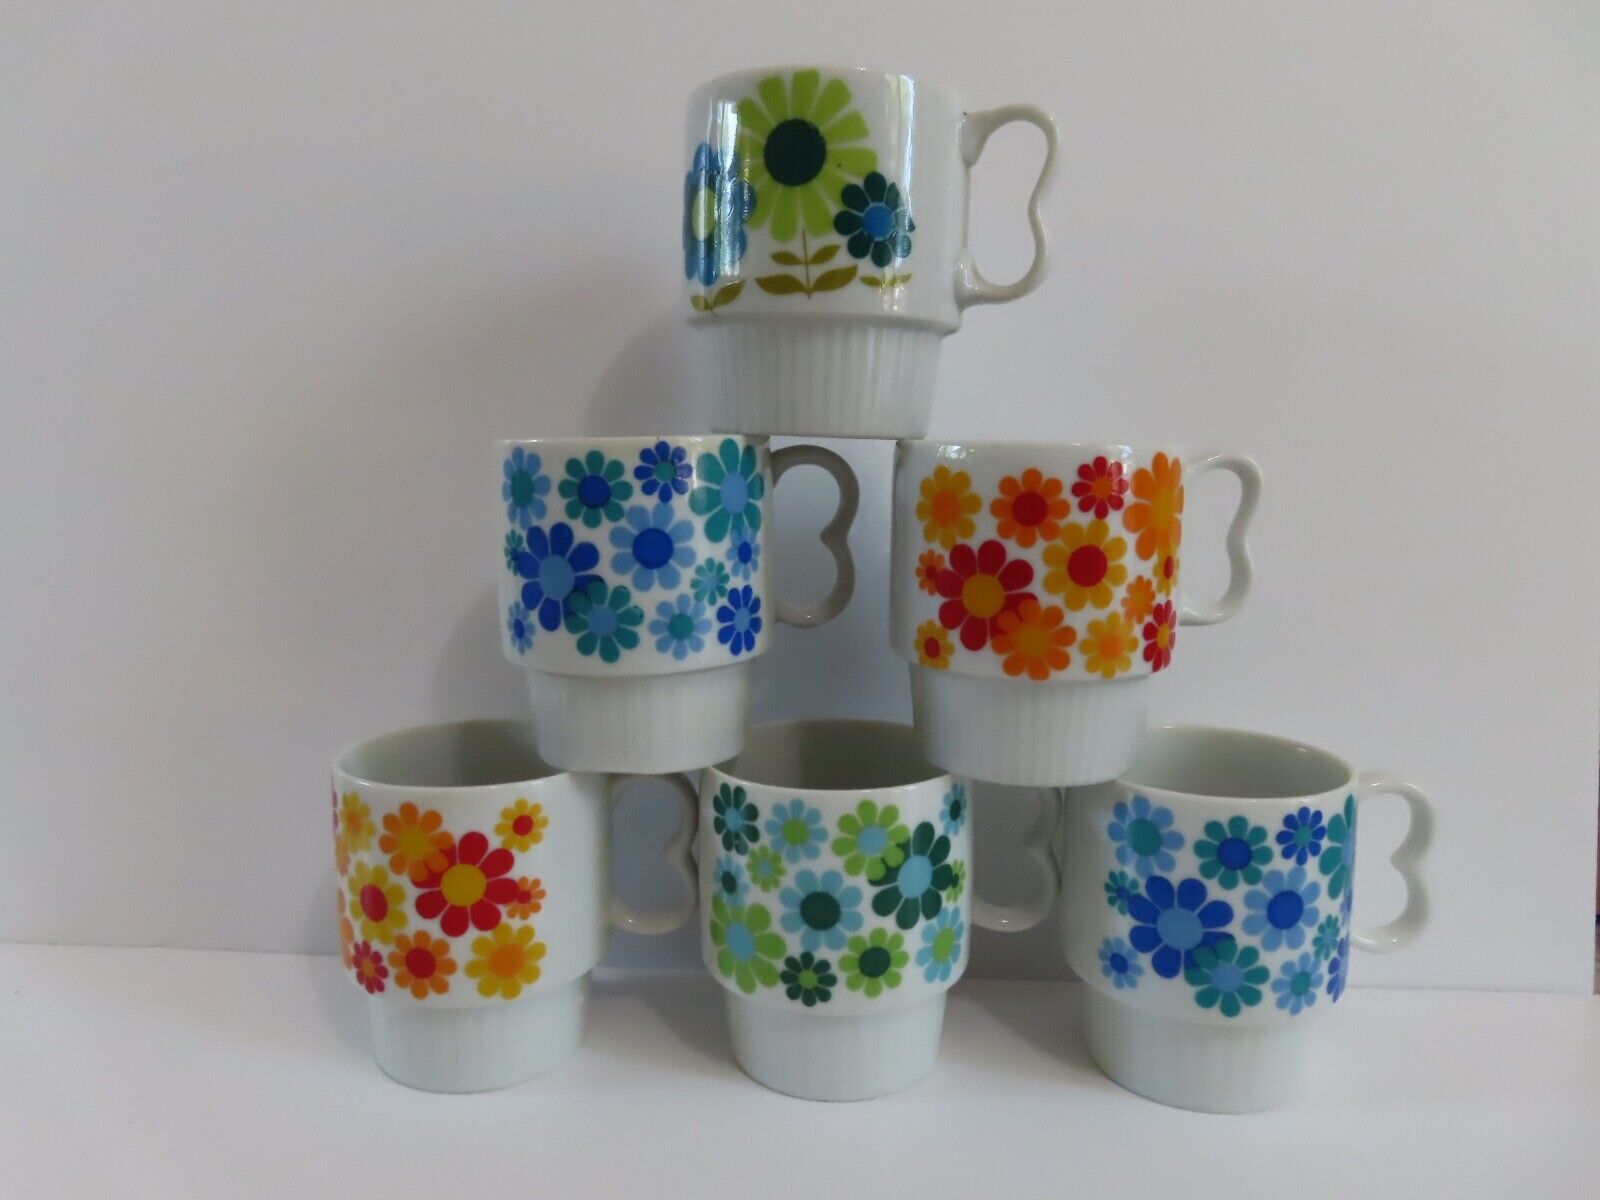 6 Vintage MCM 70s Flower Power Mod Retro Stacking Cups, Mugs, Red, Blue, Green